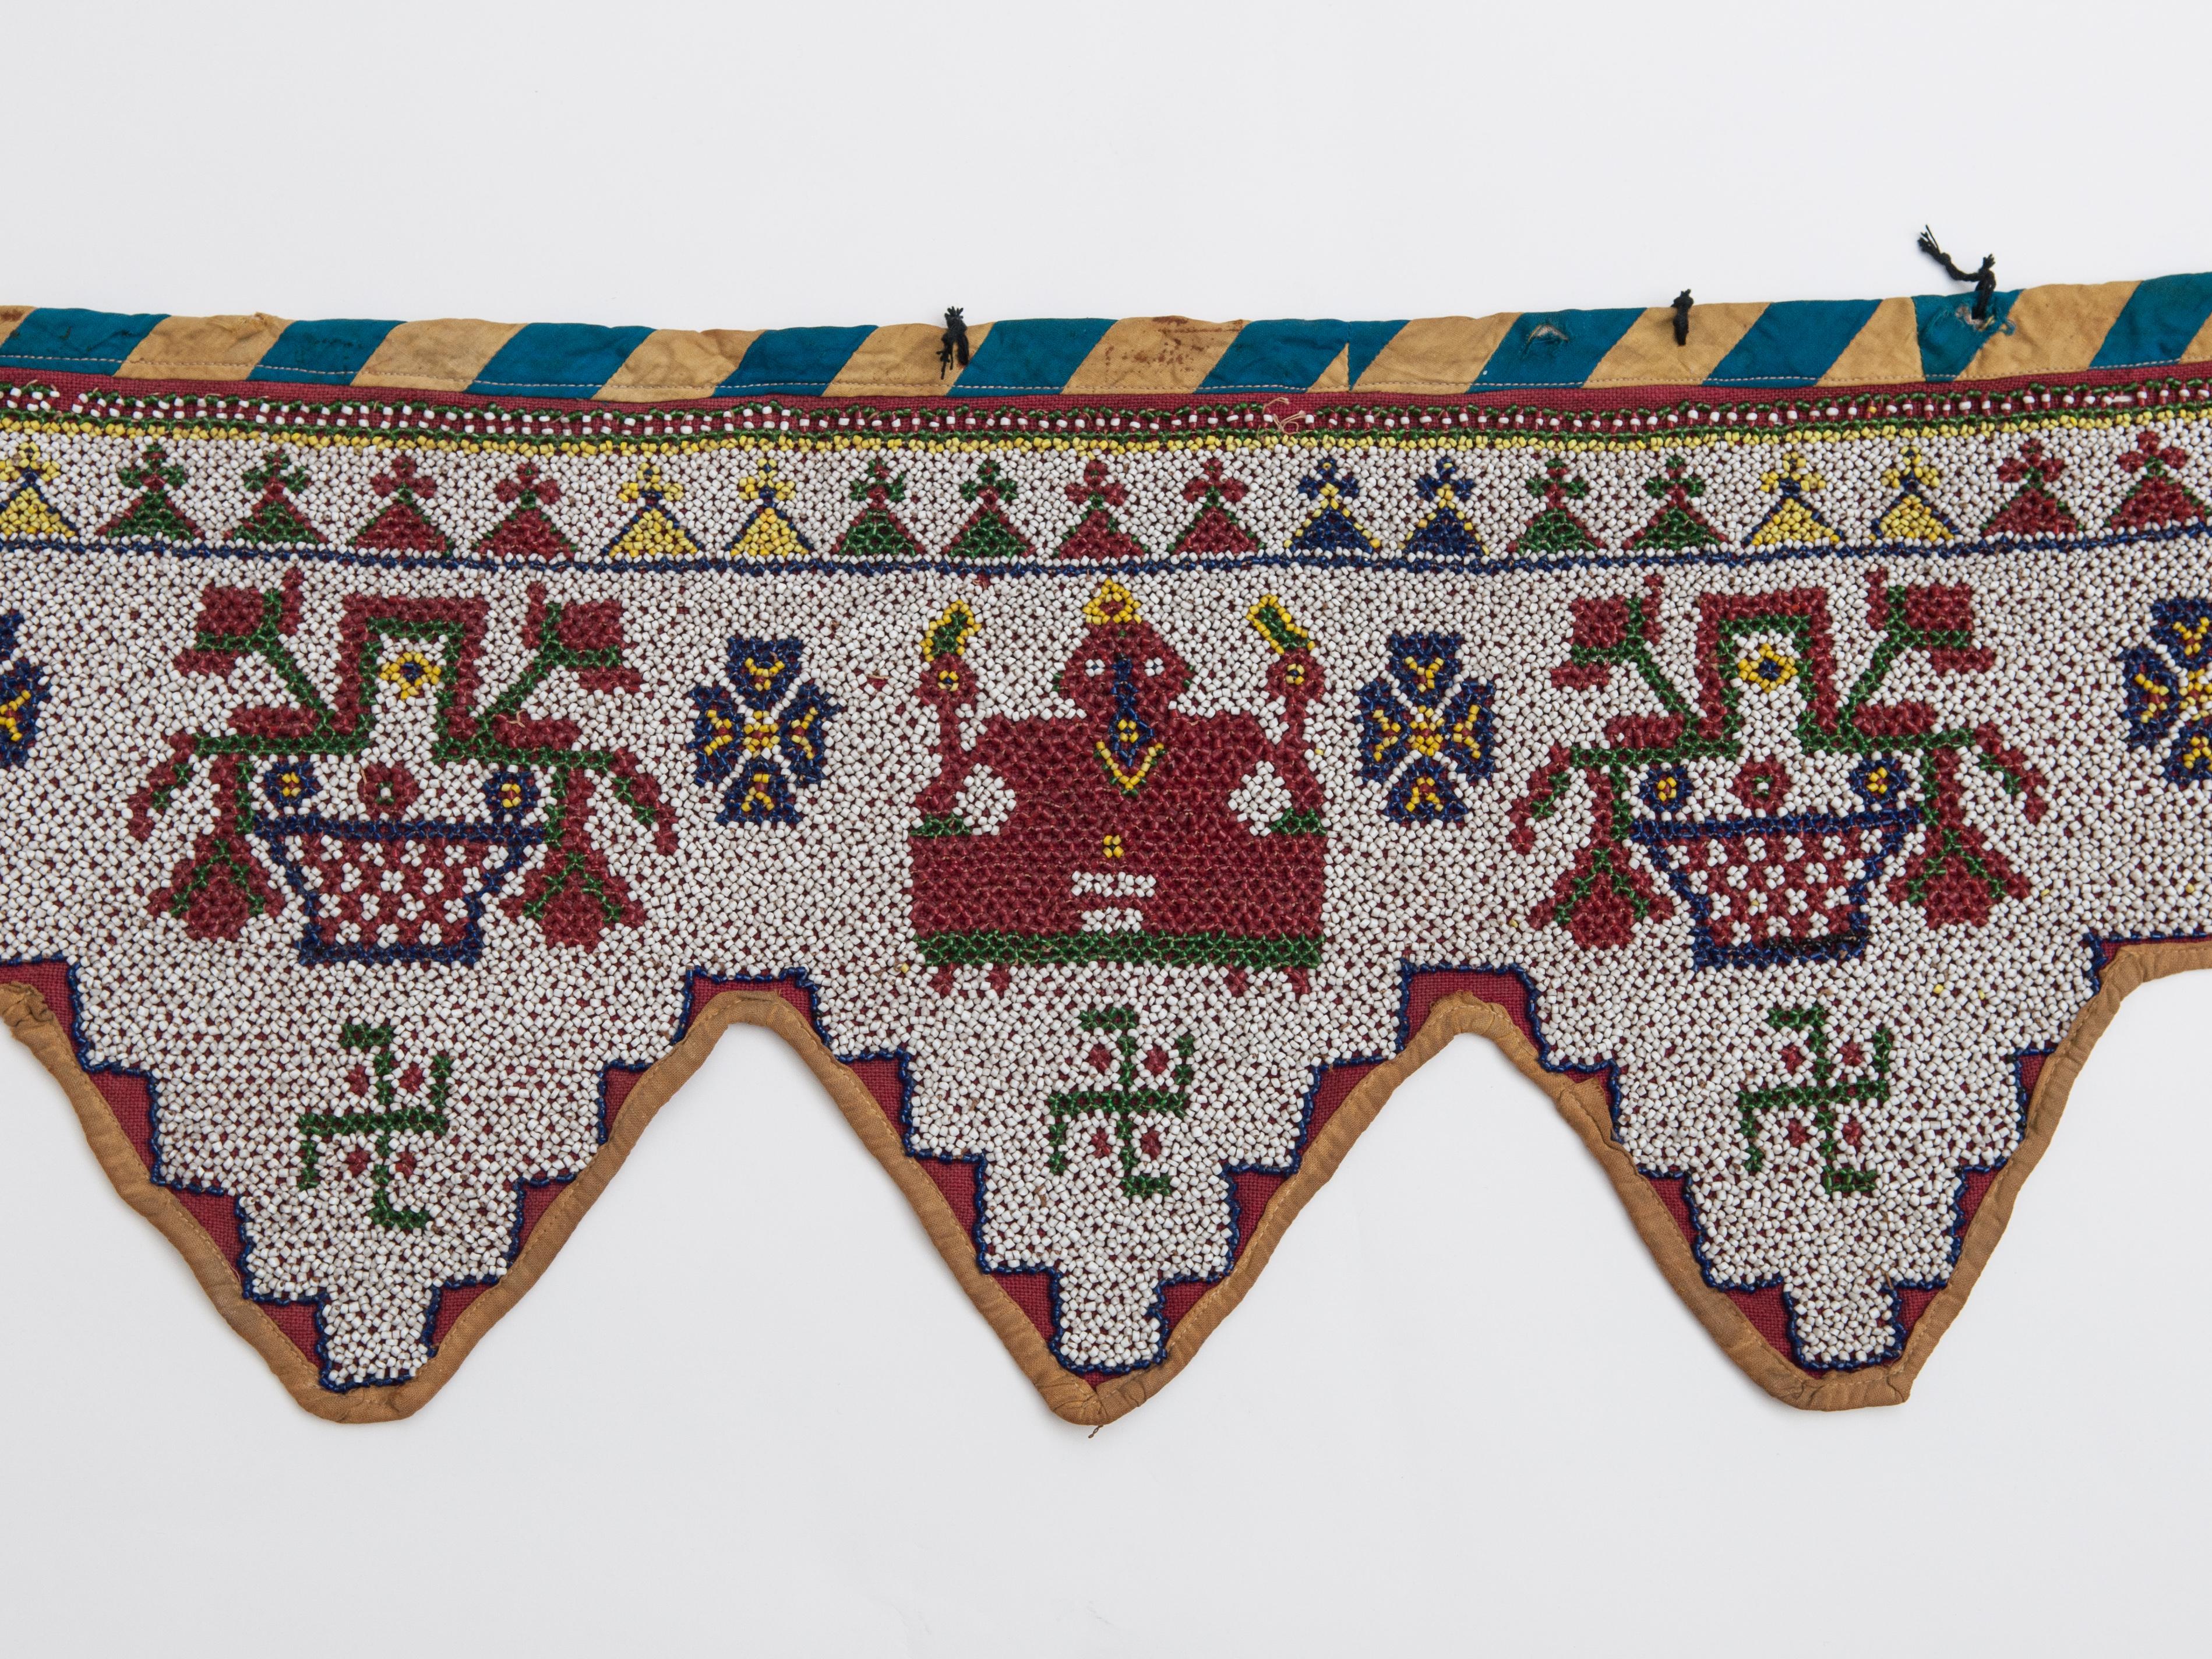 Vintage Beaded Toran doorway hanging. Kathi of Gujarat, India, mid-20th century.
Beadwork was introduced into Gujarat in the mid-1800s when Indian traders based in Zanzibar began trading Venetian beads into India. By the 1900s, the women of